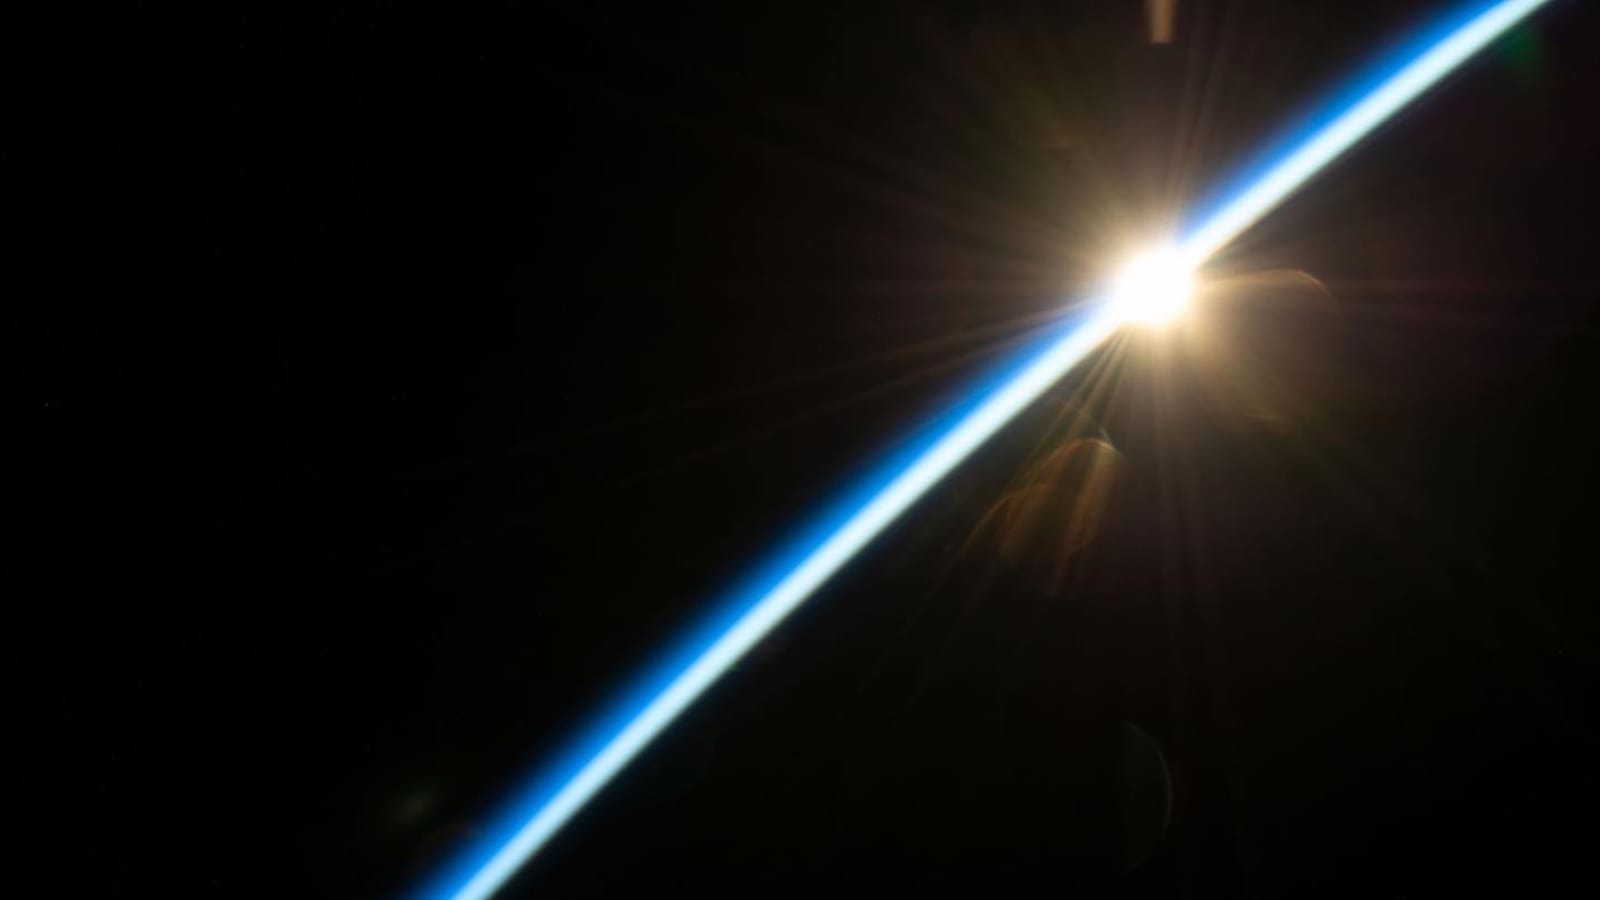 Pics showing an orbital sunrise captured from the ISS wow people